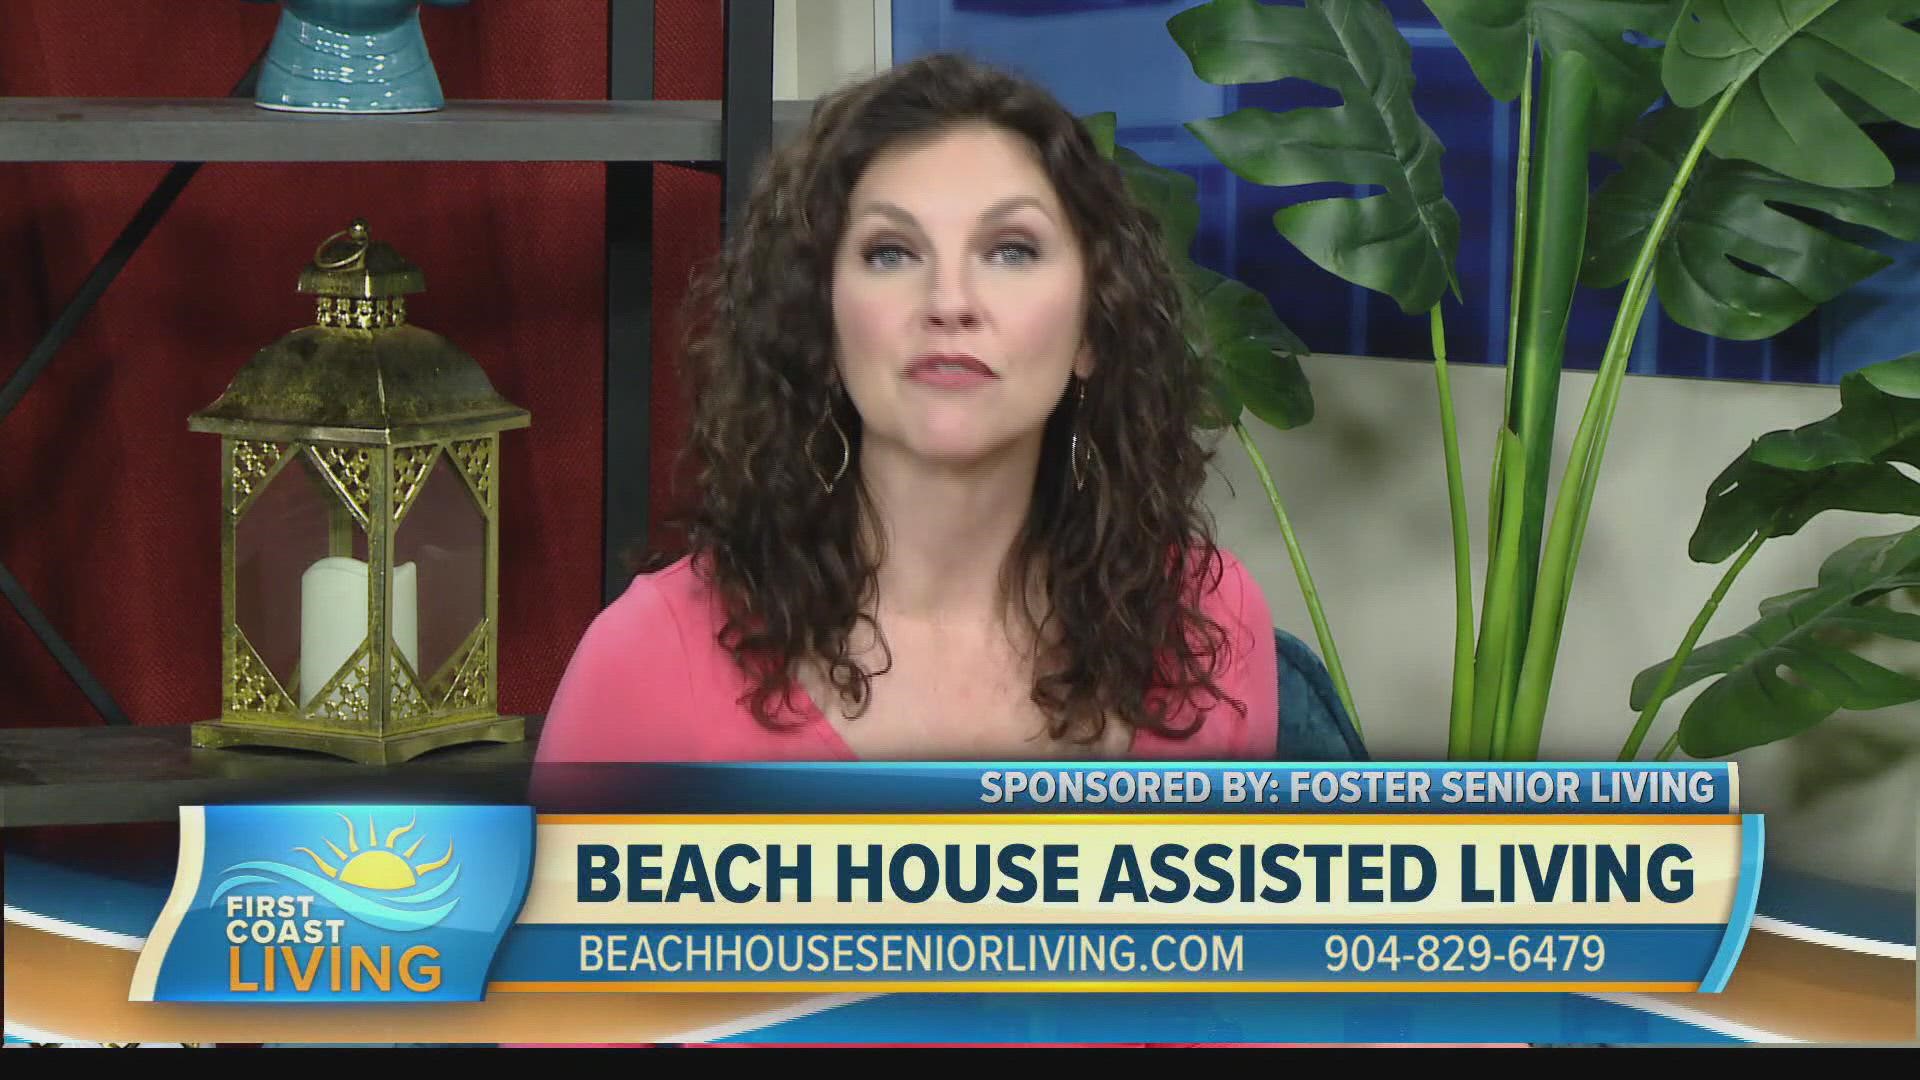 Bethany Larkins, the Executive Director at Beach House Senior Living shares what makes Beach House a "one stop shop" for those looking to live life to the fullest.